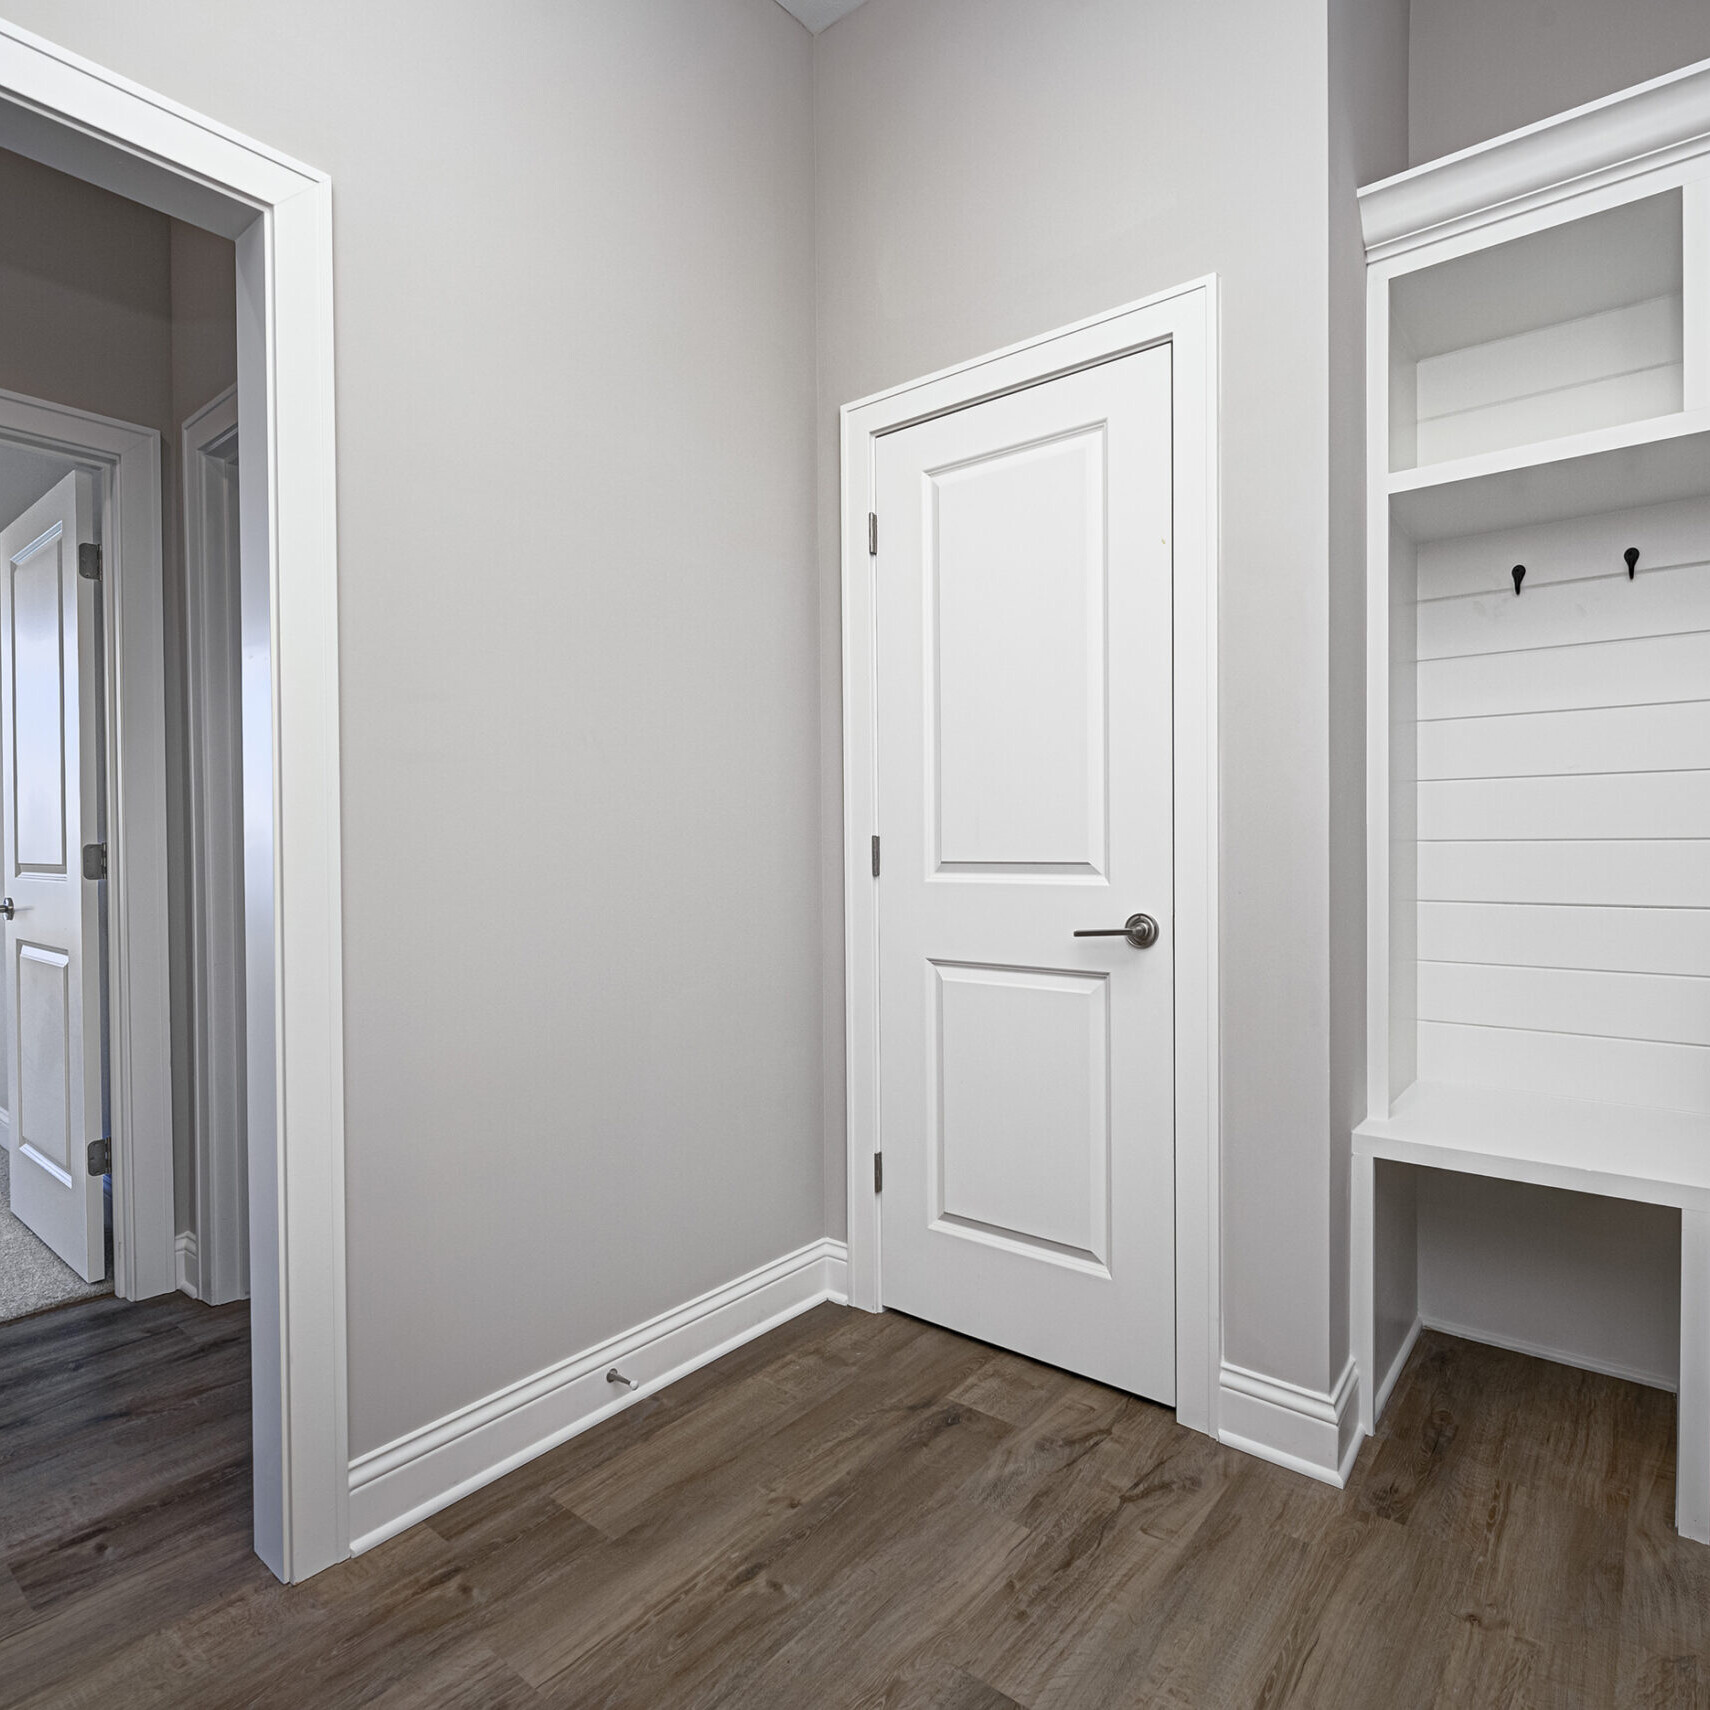 A custom hallway with a white door and wood floors in a home built by Custom Homes Westfield Indiana.